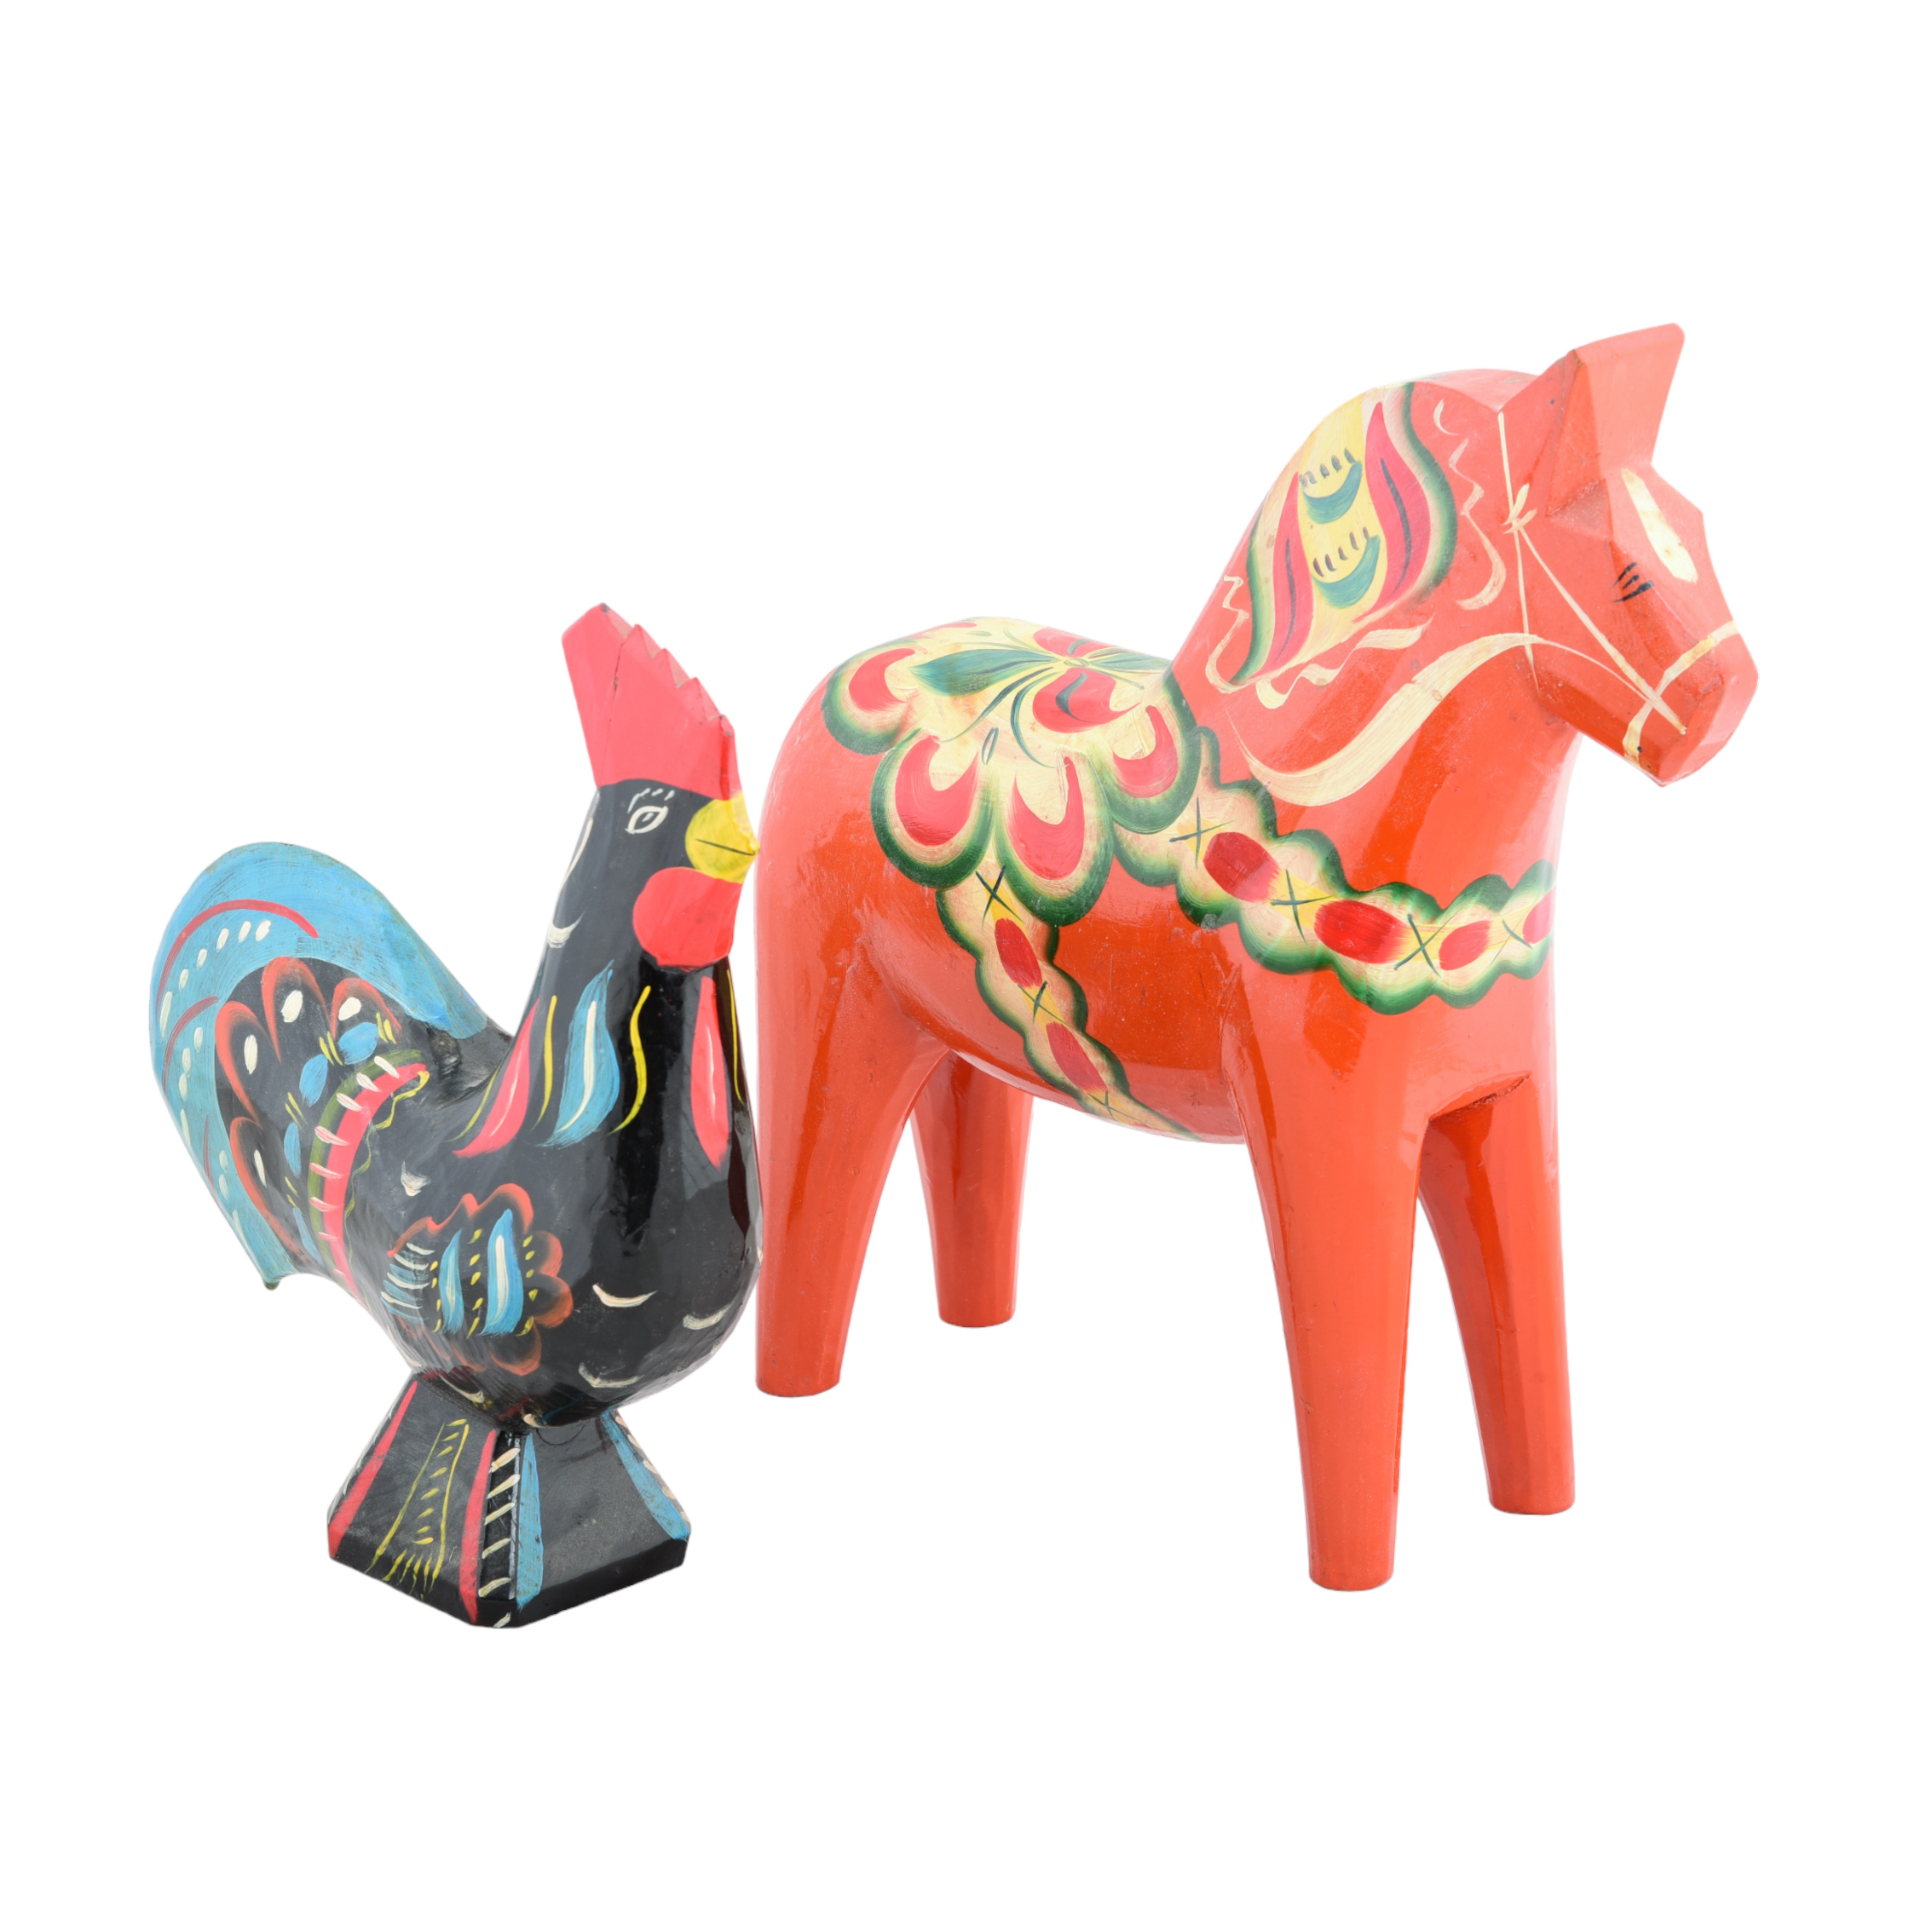 Swedish Dala horse and rooster